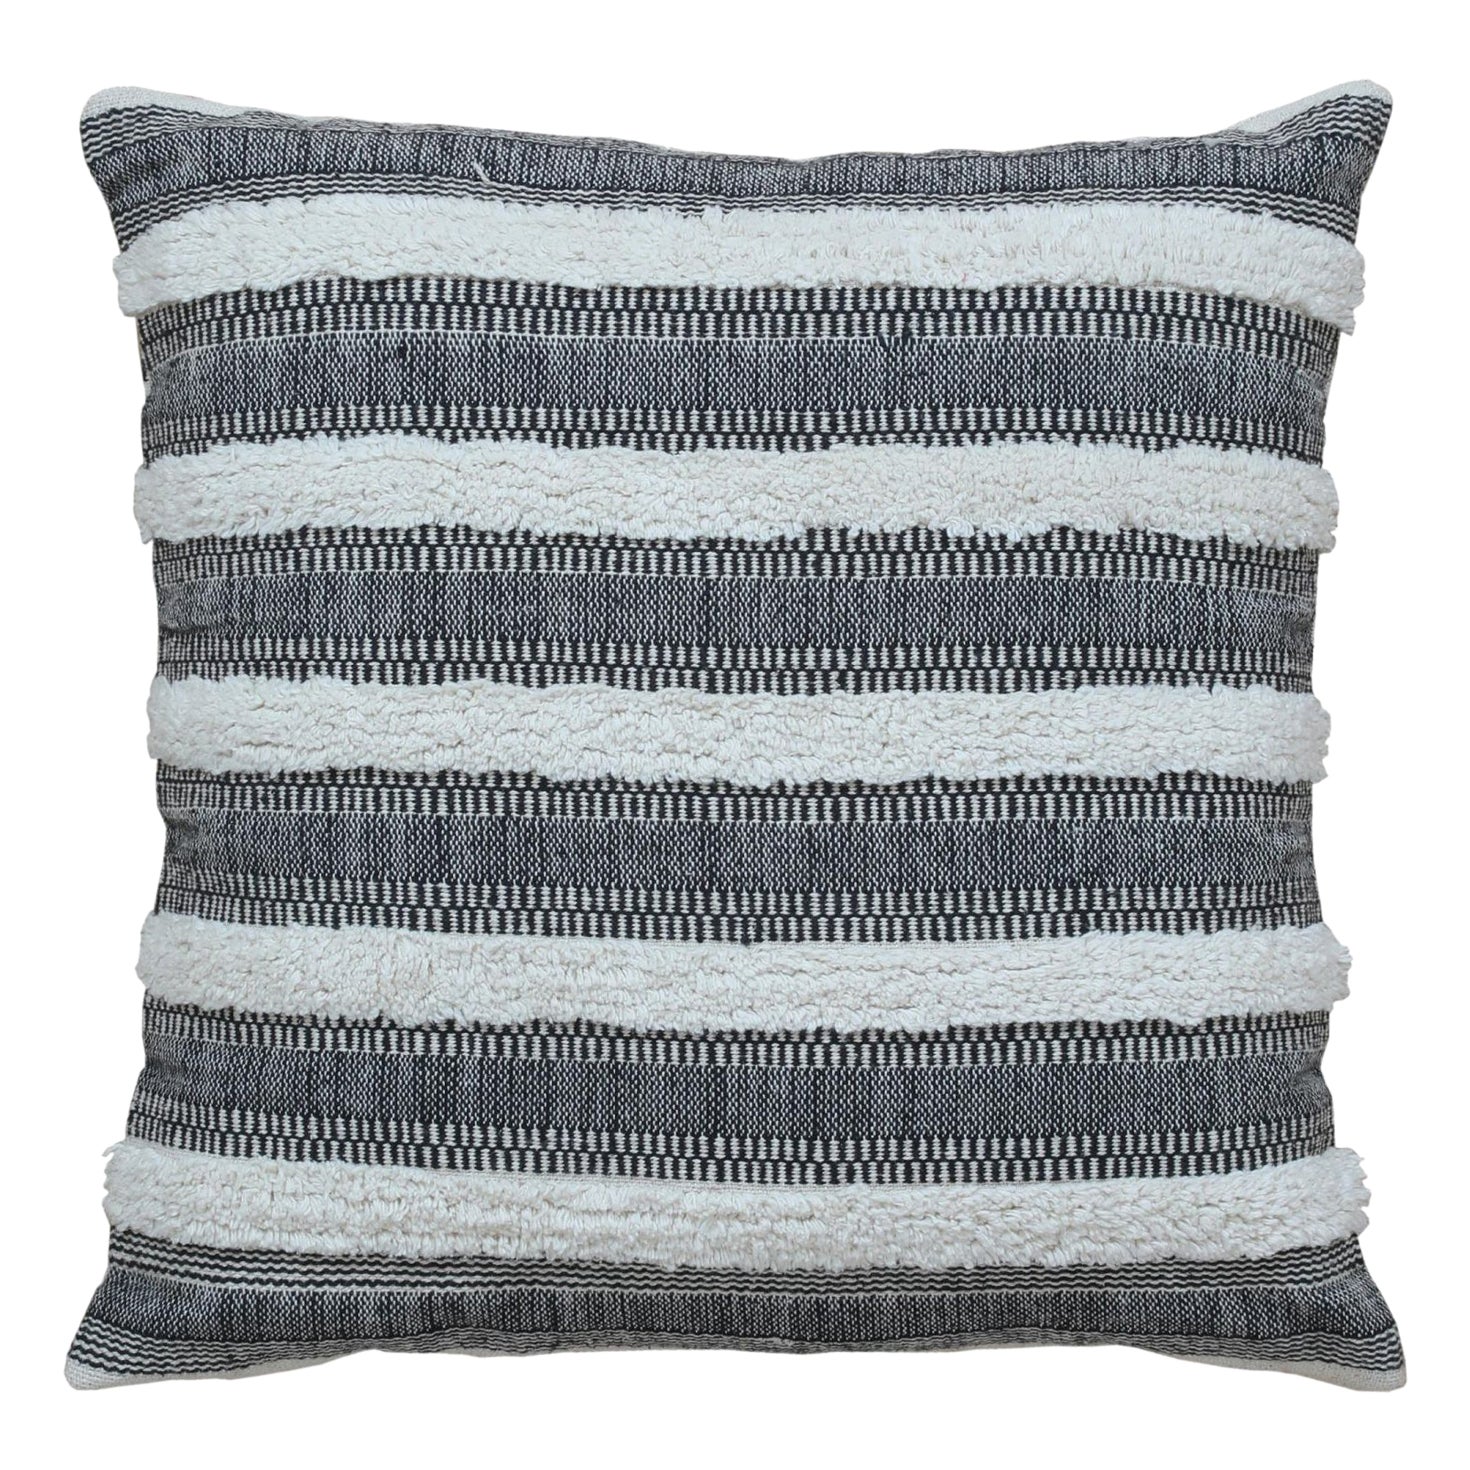 Gray Boho Chic Wool and Cotton Pillow With Geometric Design